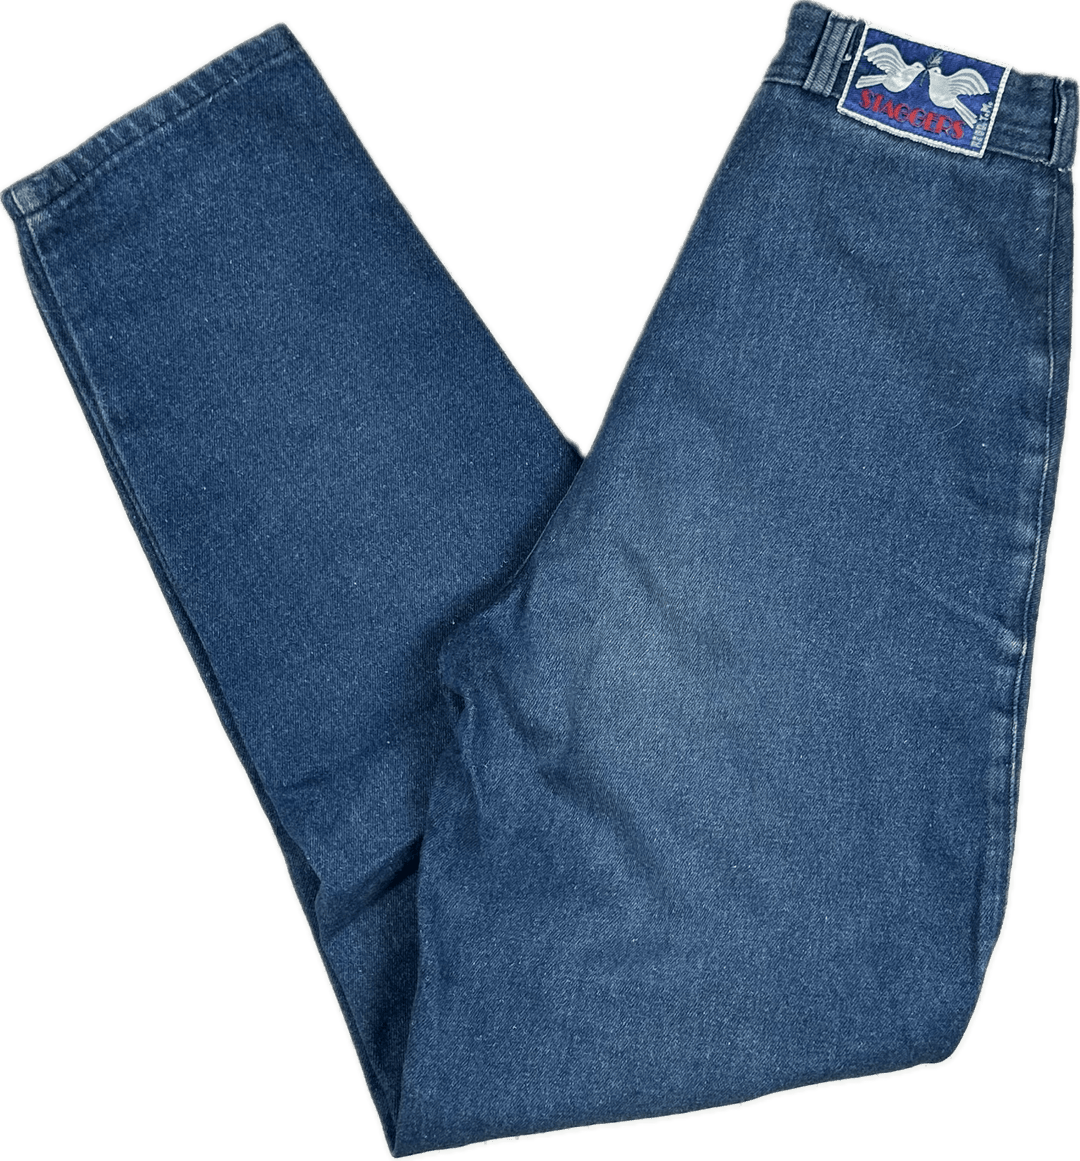 Staggers by Joseph Saba Vintage 1980's Jeans - Hard to find! - Jean Pool